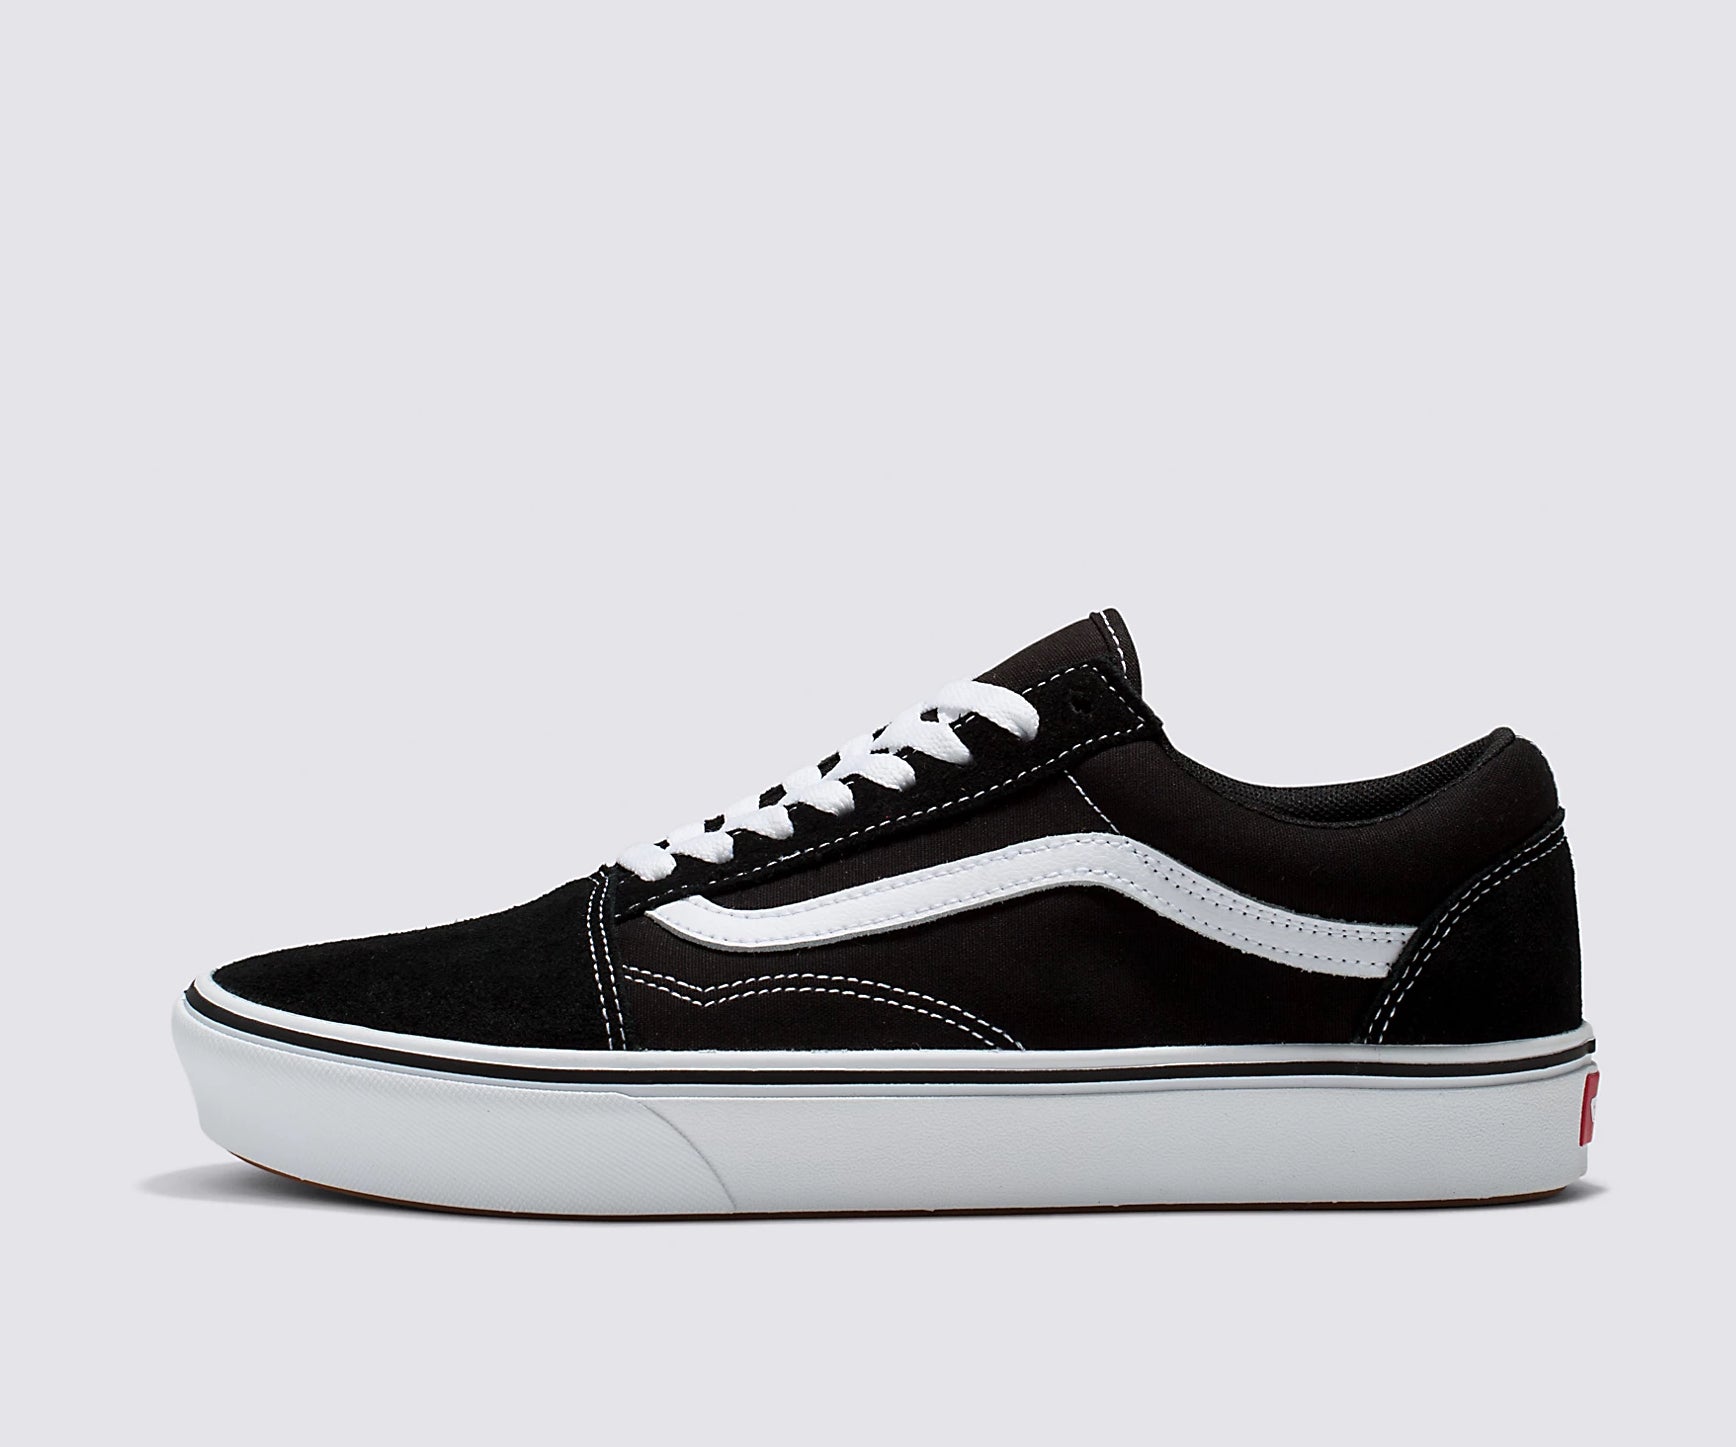 A black and white canvas lace-up skate shoe from Vans.